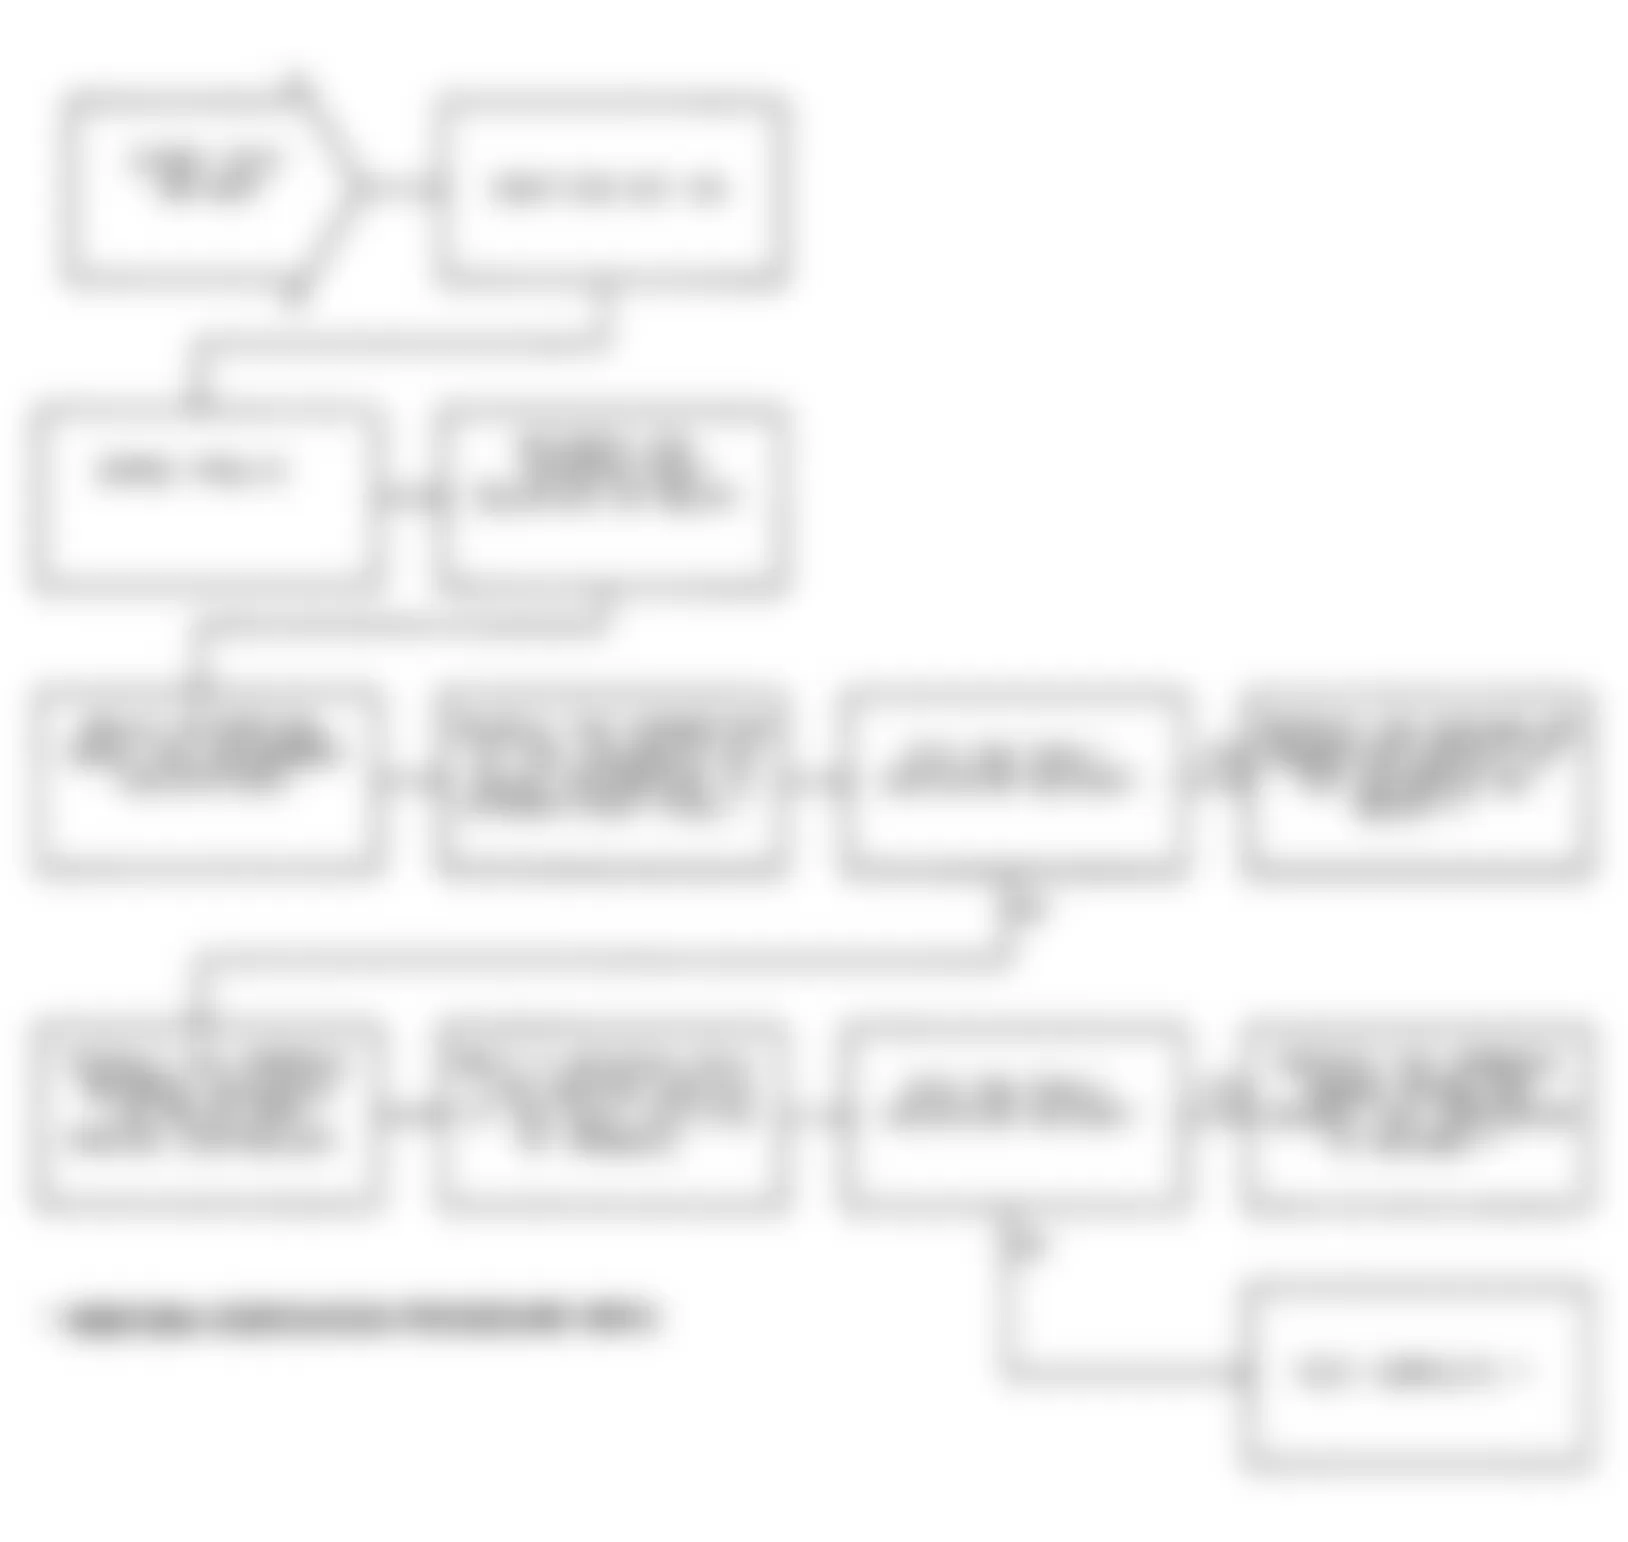 Chrysler Imperial 1991 - Component Locations -  Test DR-46A: Flowchart